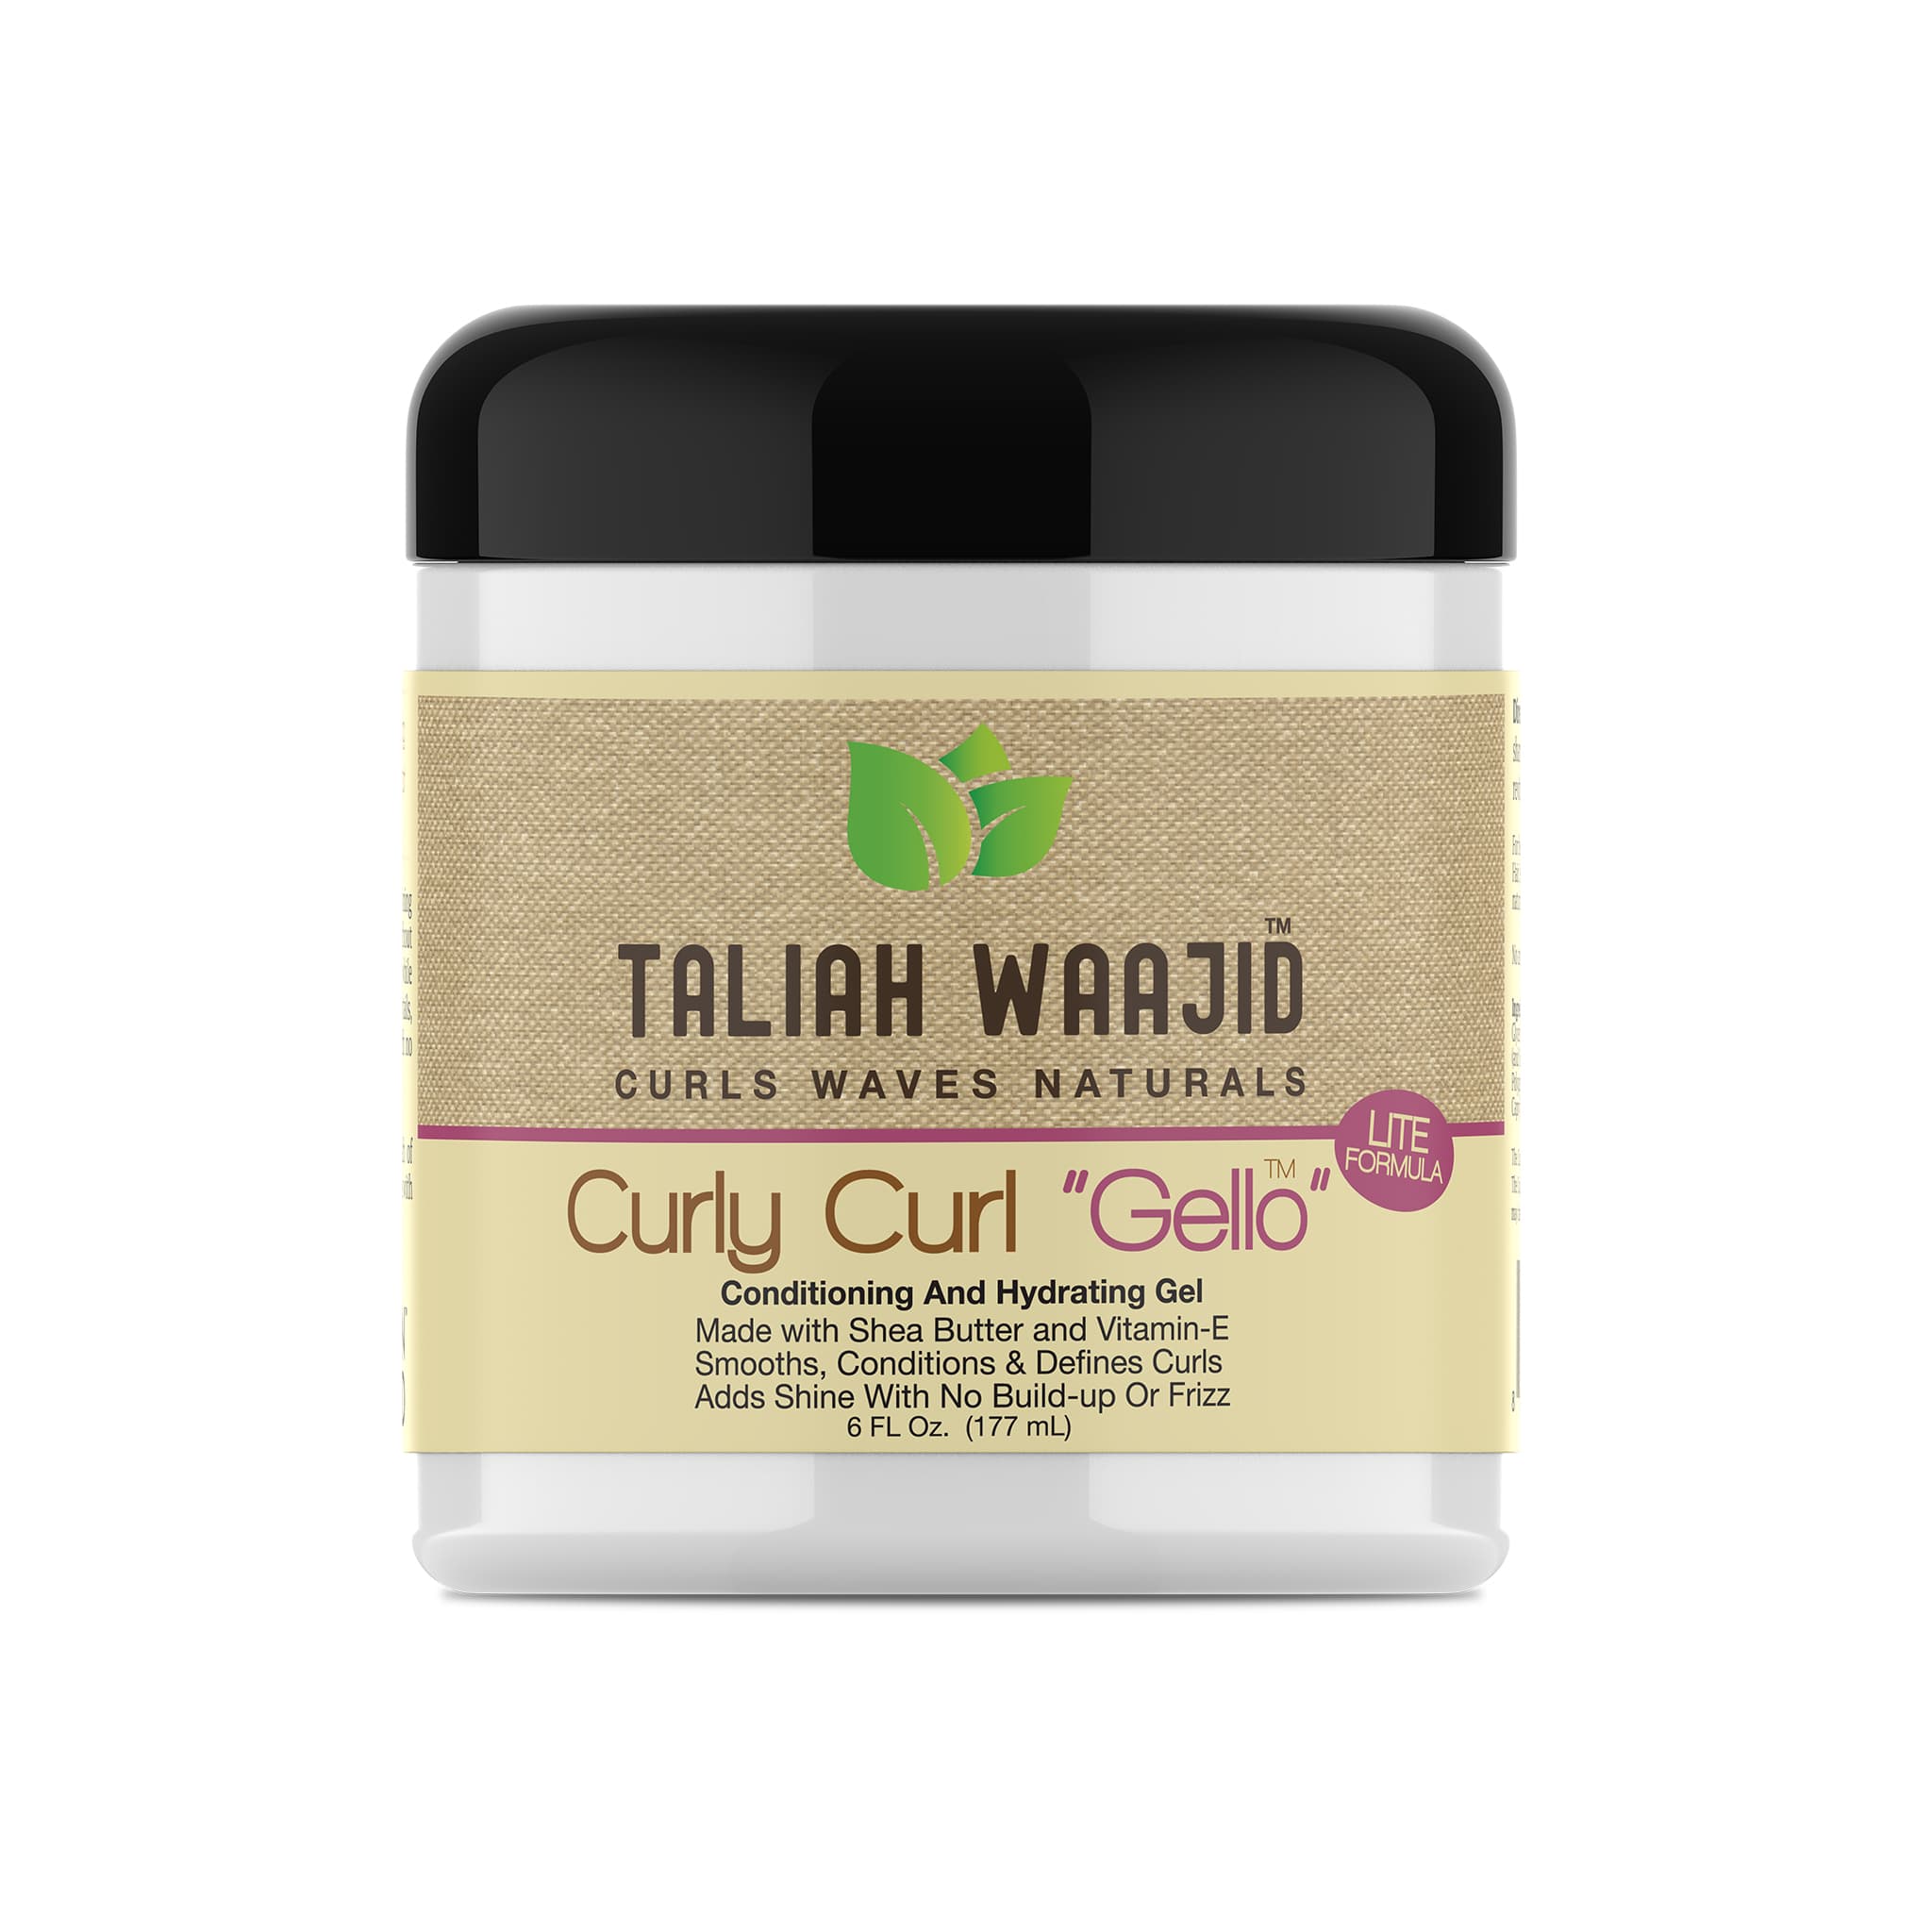 Taliah Waajid Curls Waves Natural Curly Curl “Gello” 6oz - Hydrating Gel That Stops Frizz and Adds Moisture To Your Hair - image 3 of 6